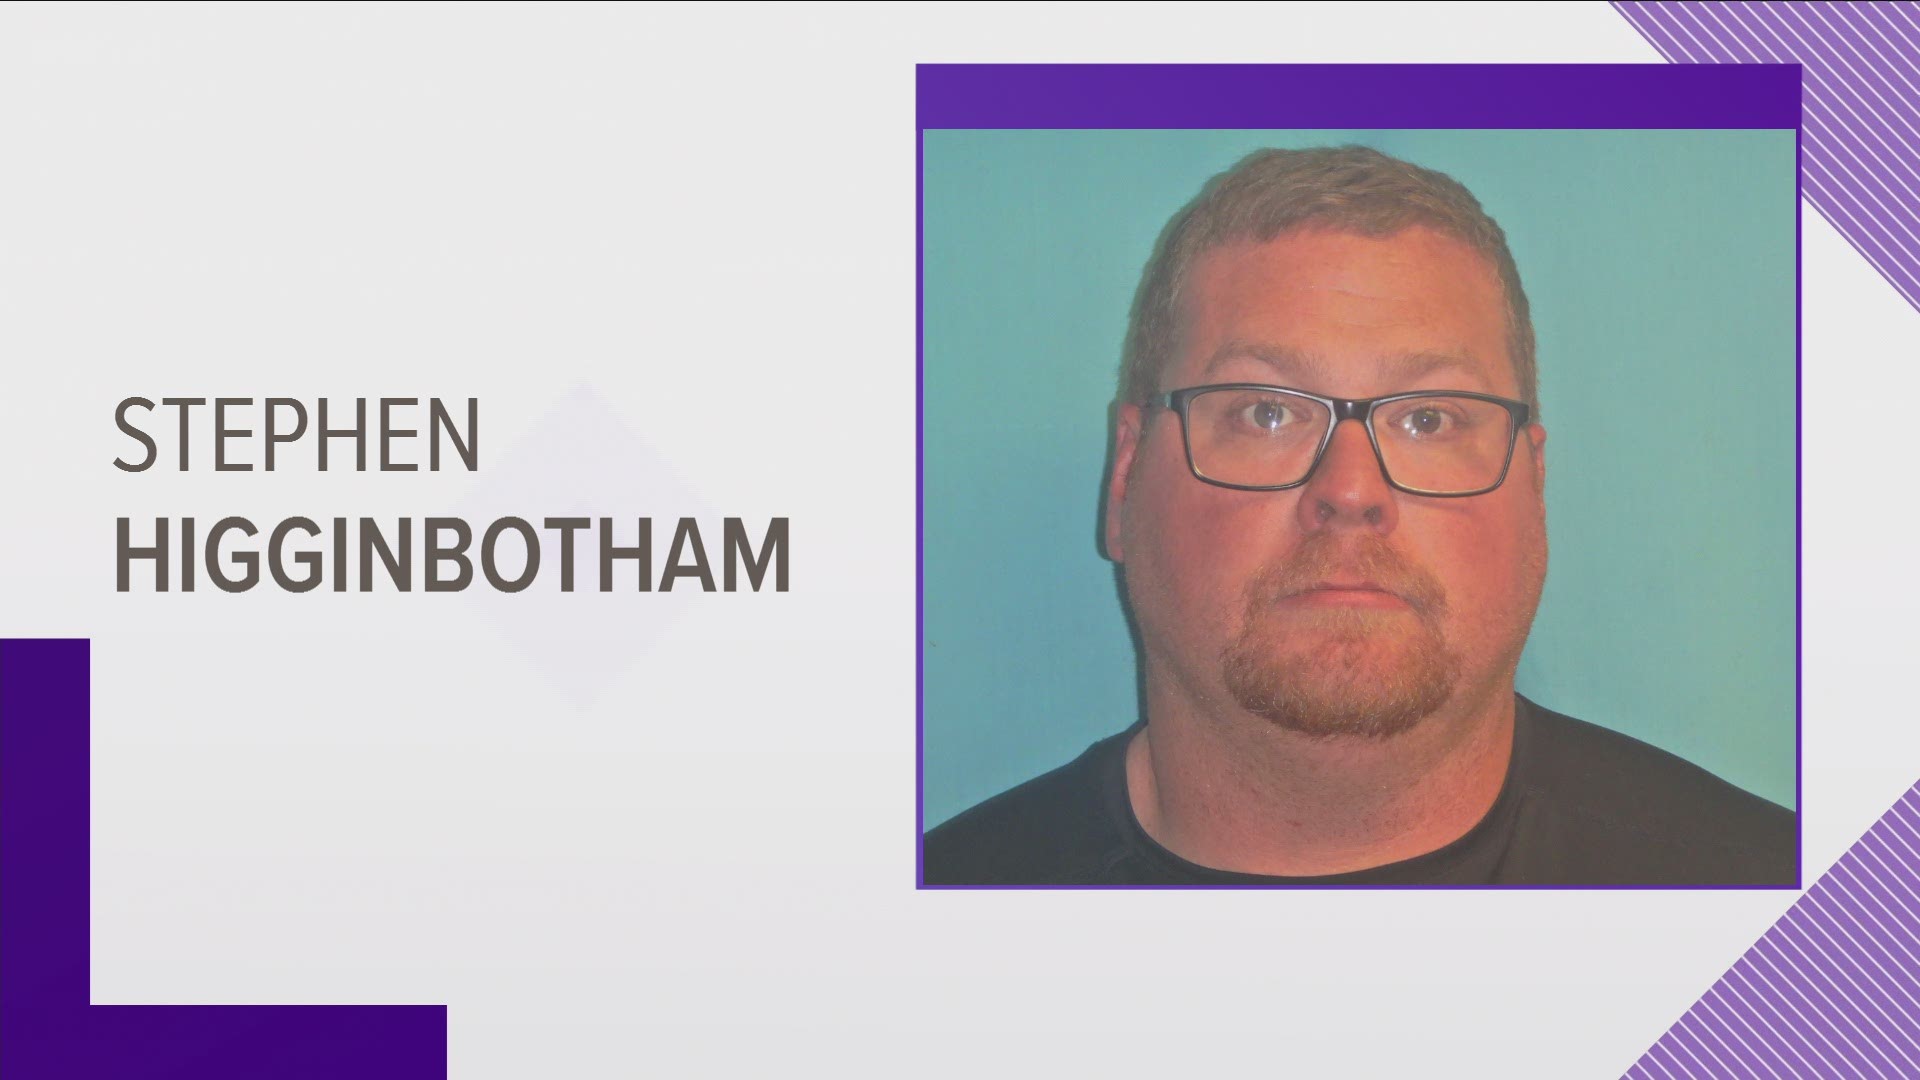 Stephen Higginbotham faces charges for taking more than $10,000 from the O&S Chapel United Methodist Church in Greene County.